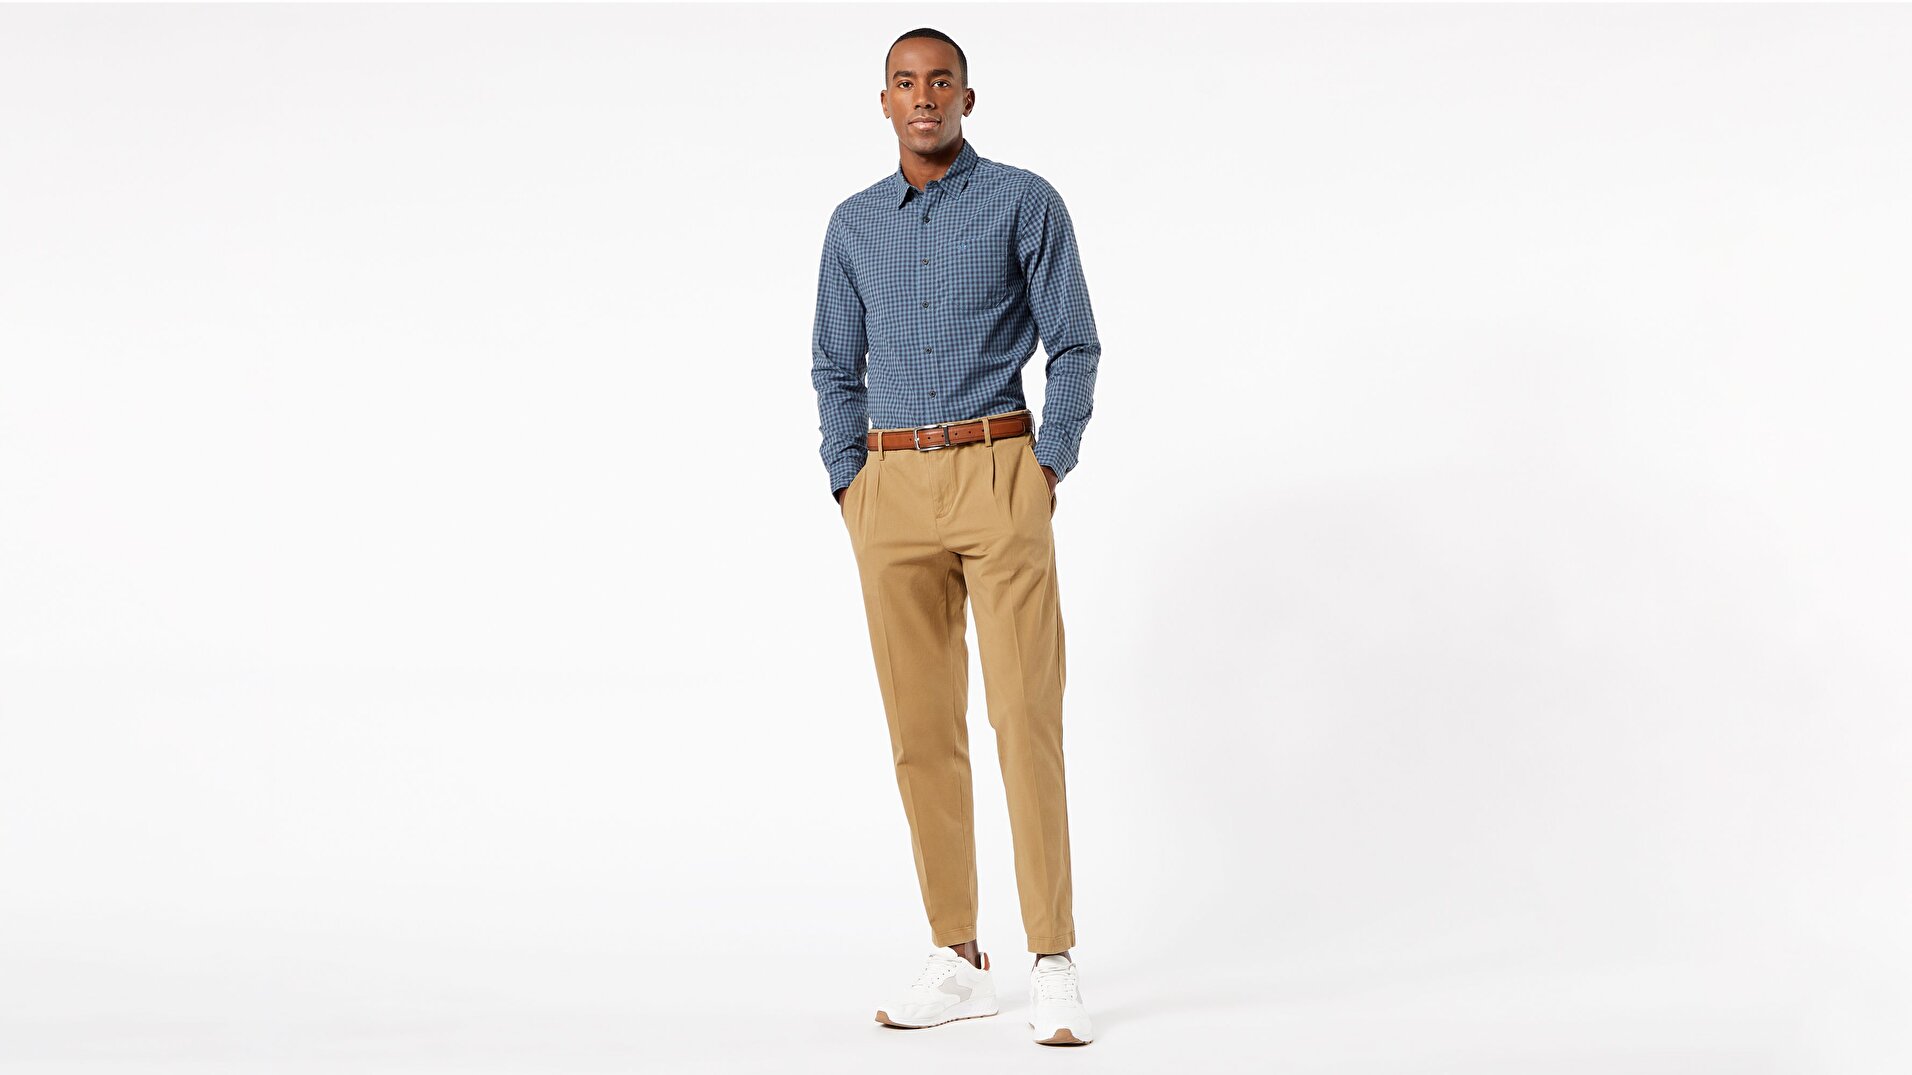 Heritage Chino, Tapered Fit